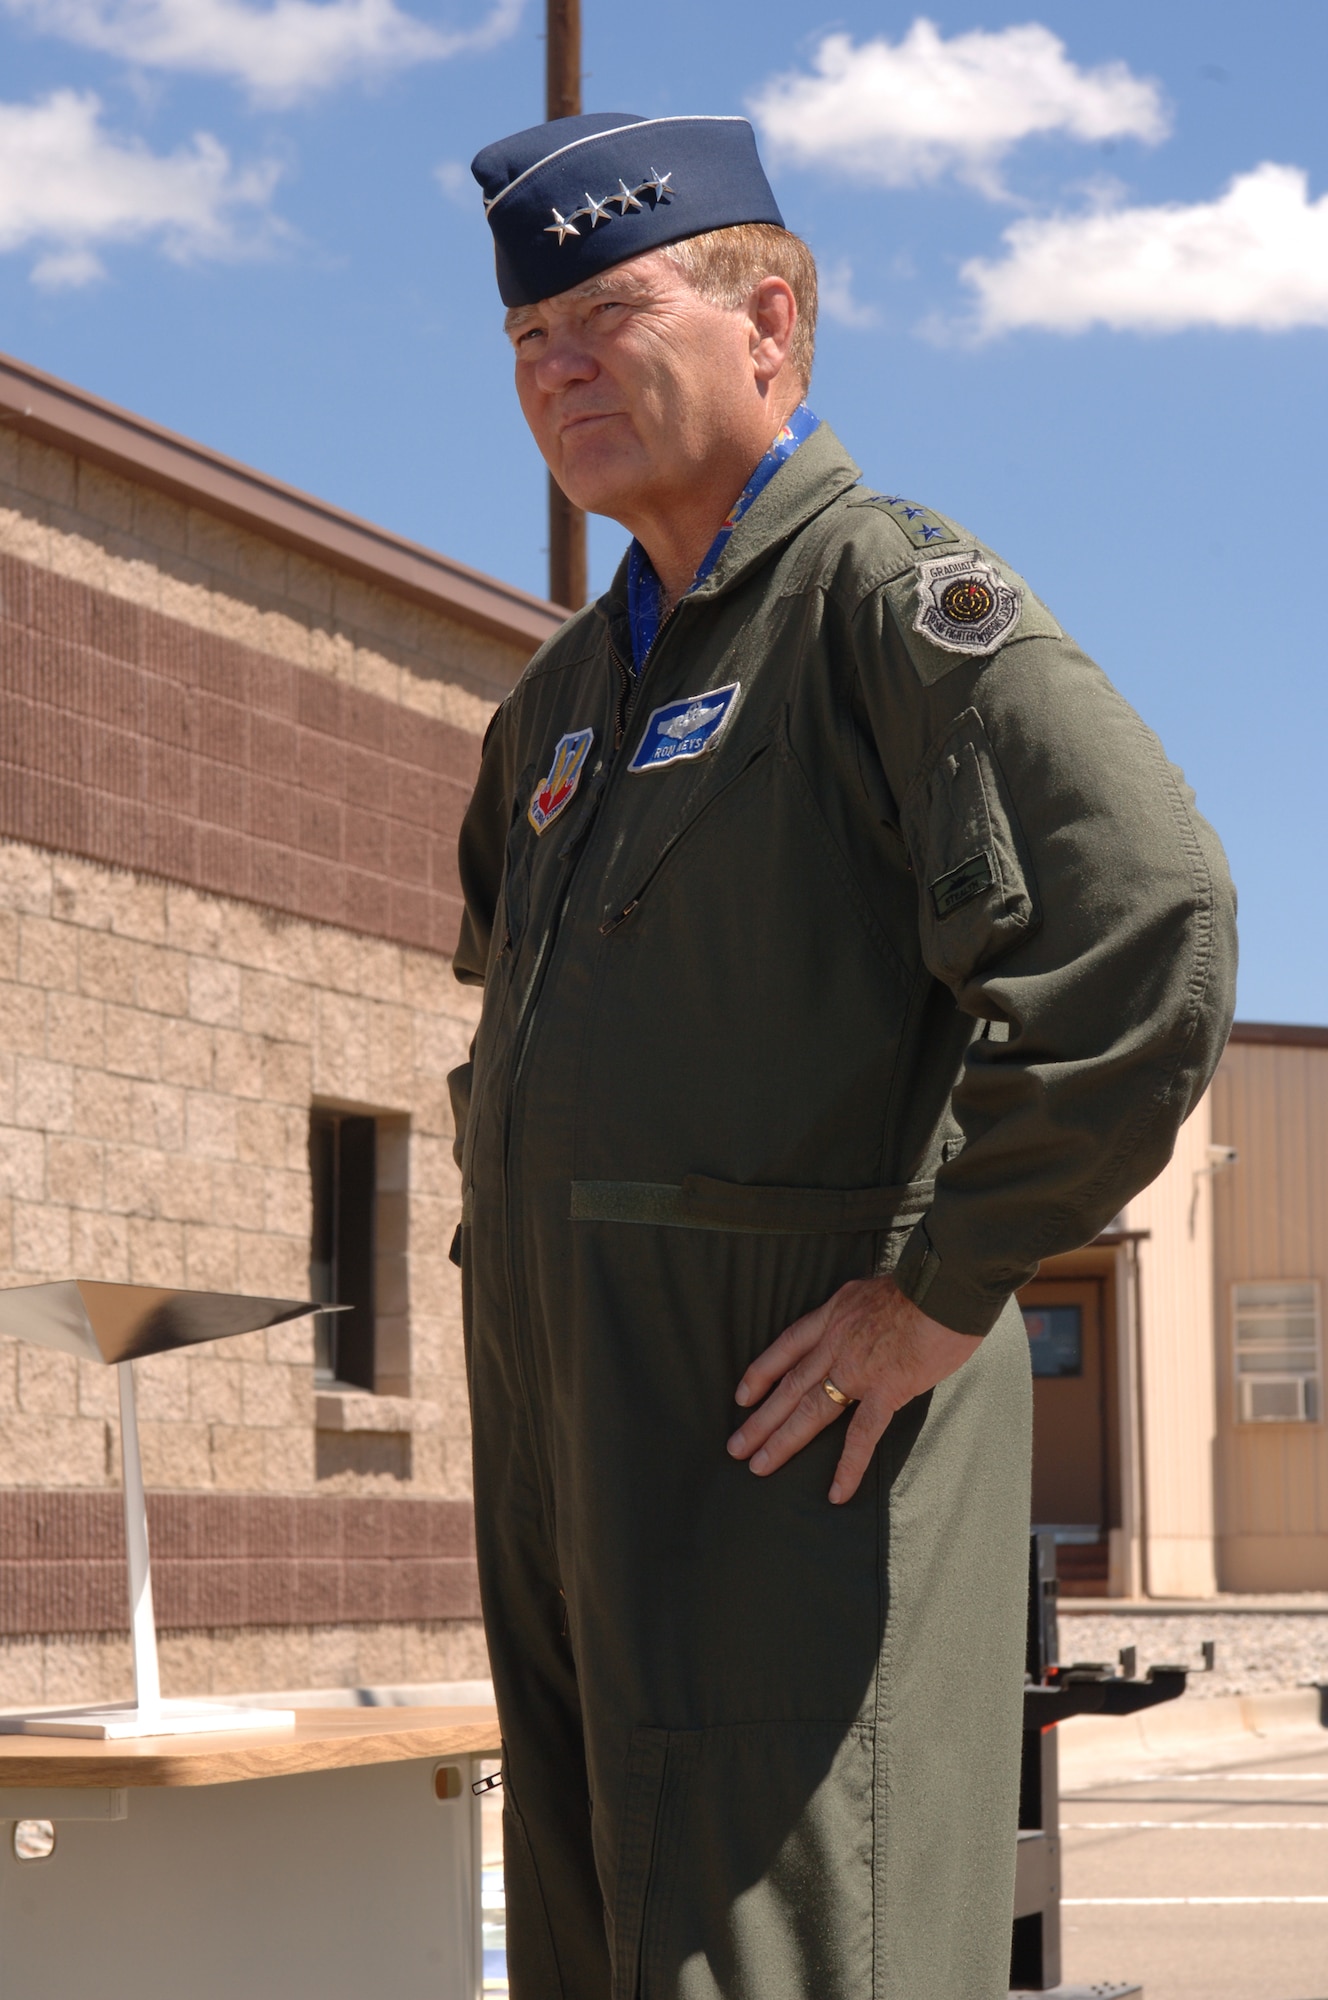 General Ronald Keys overlooks the flightline operations at Holloman AFB, N.M. during his visit to the base Sept. 14.